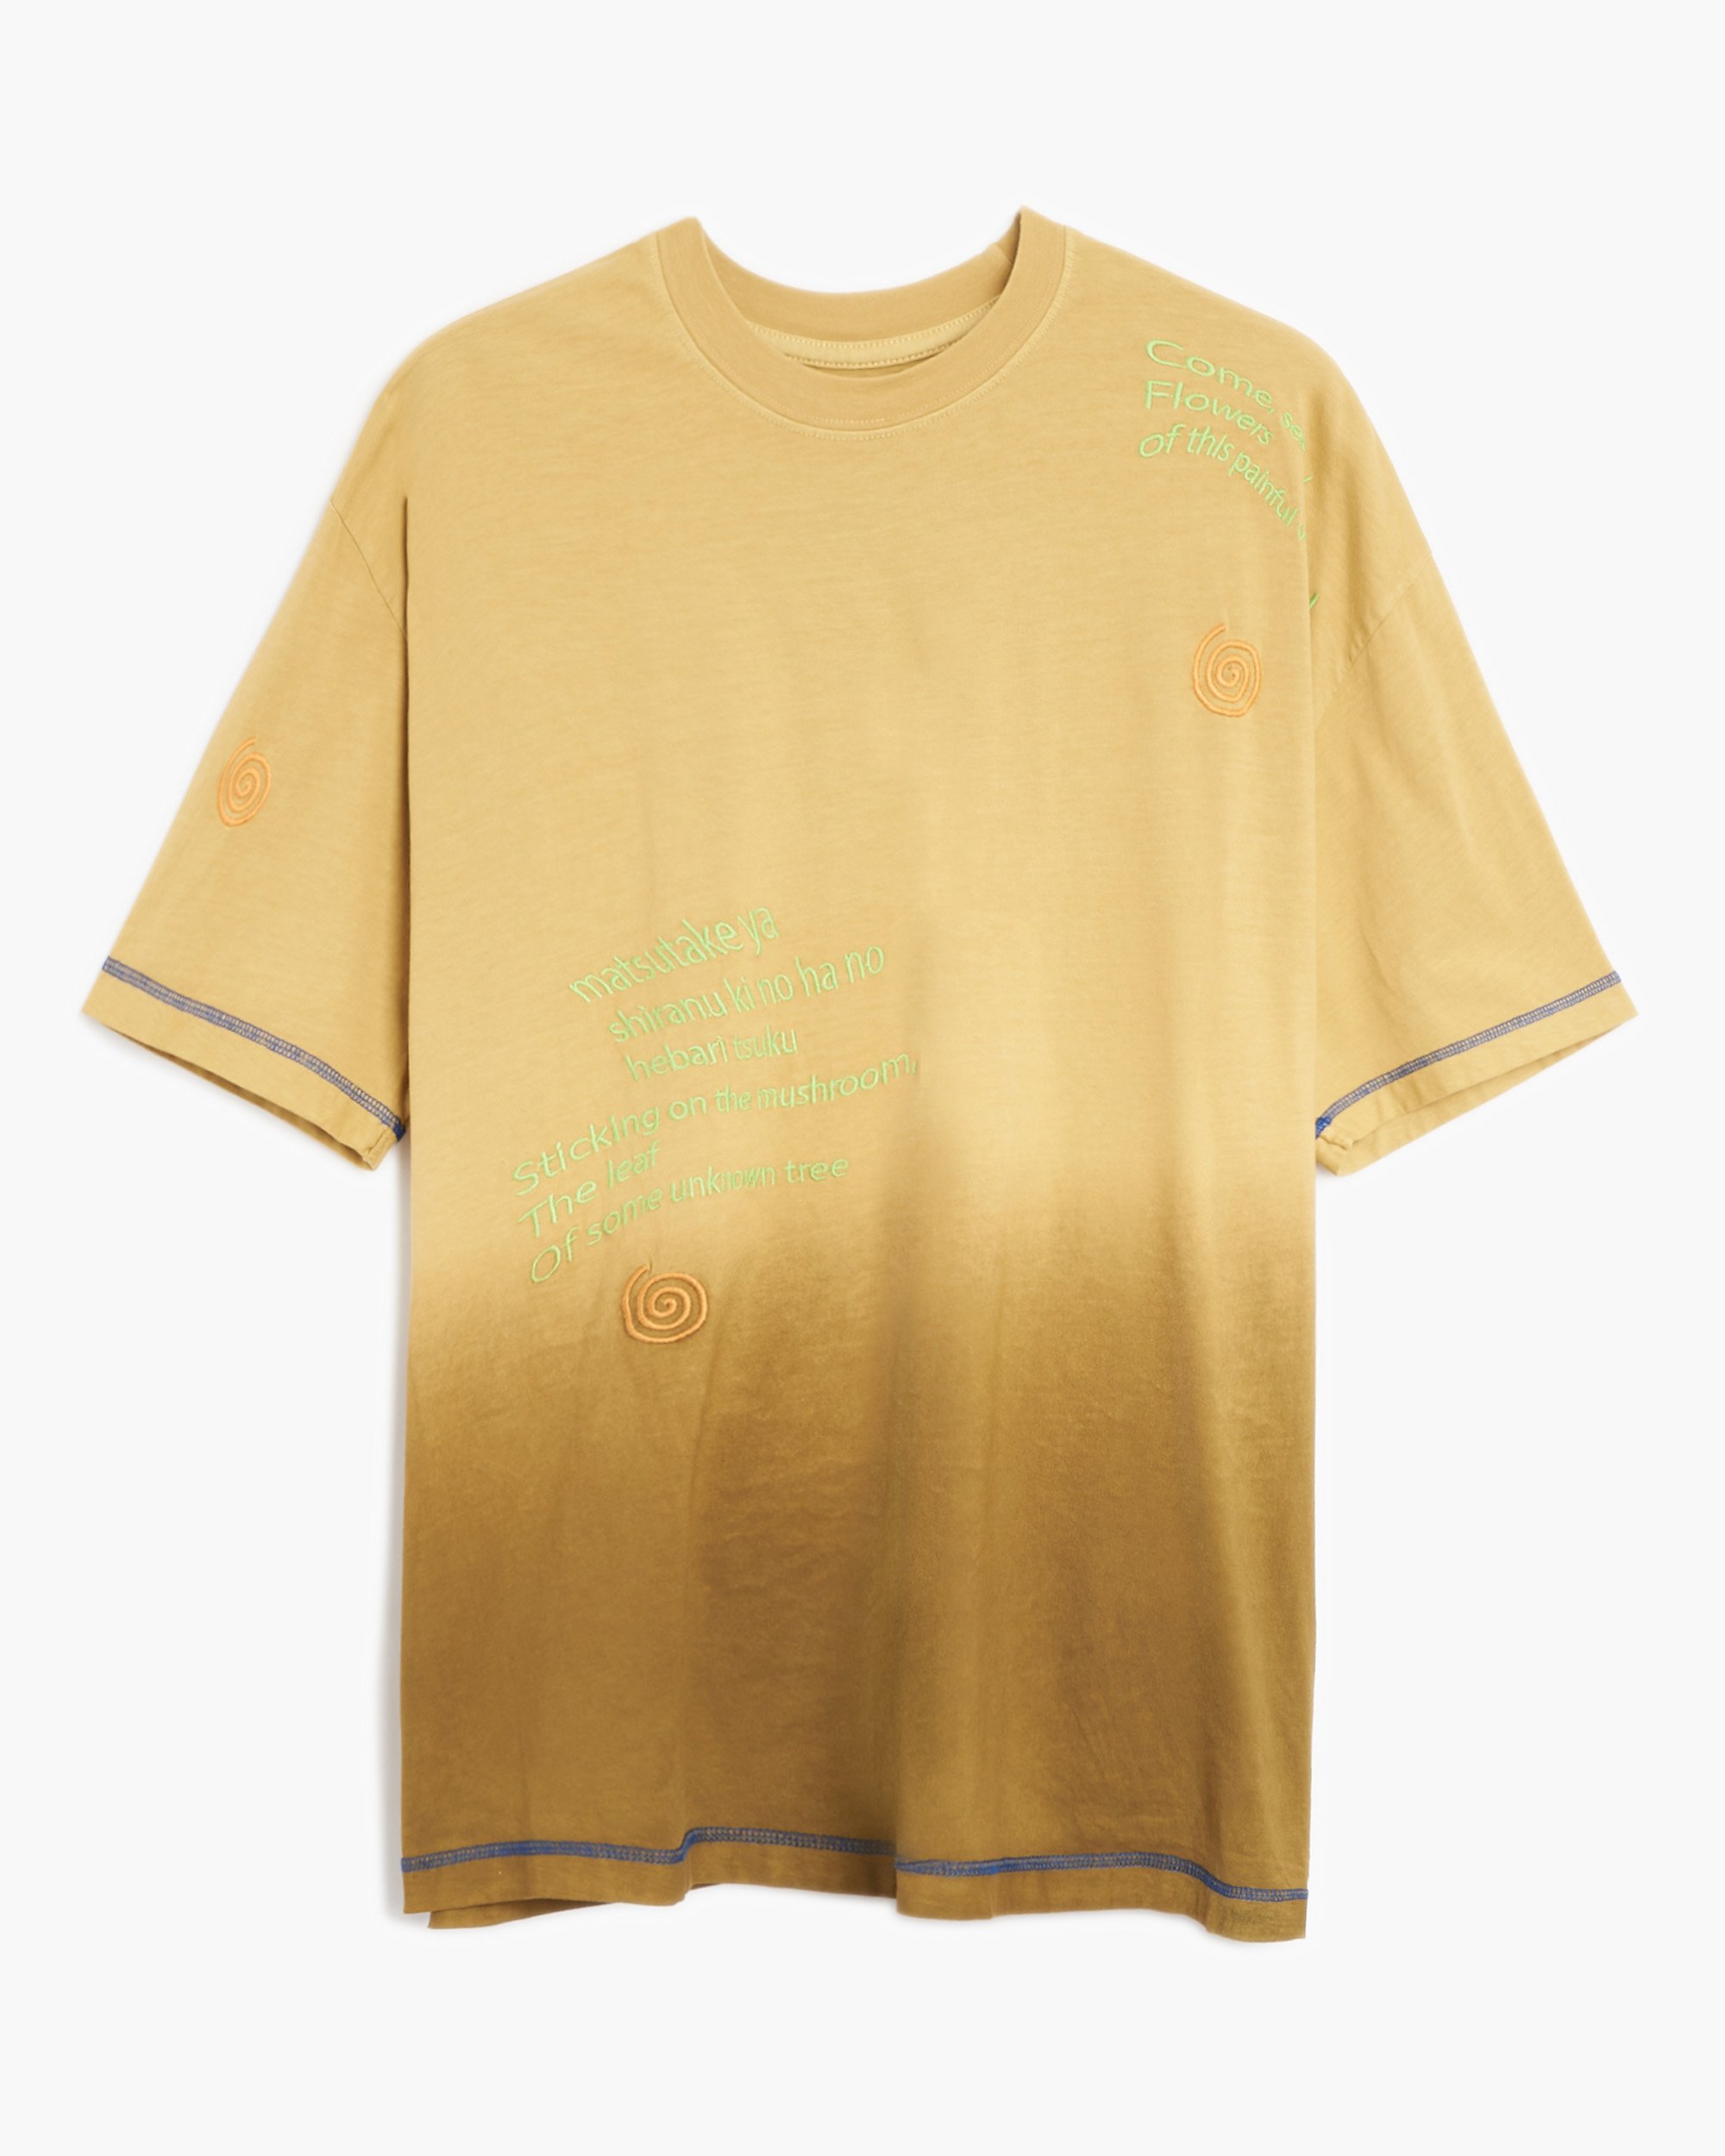 nedenunder fjende Rise Perks And Mini Dip Into Neo Basho Men's Reversible T-Shirt "Poetry And  Motion" Beige PS221462-DIPDYE| Buy Online at FOOTDISTRICT